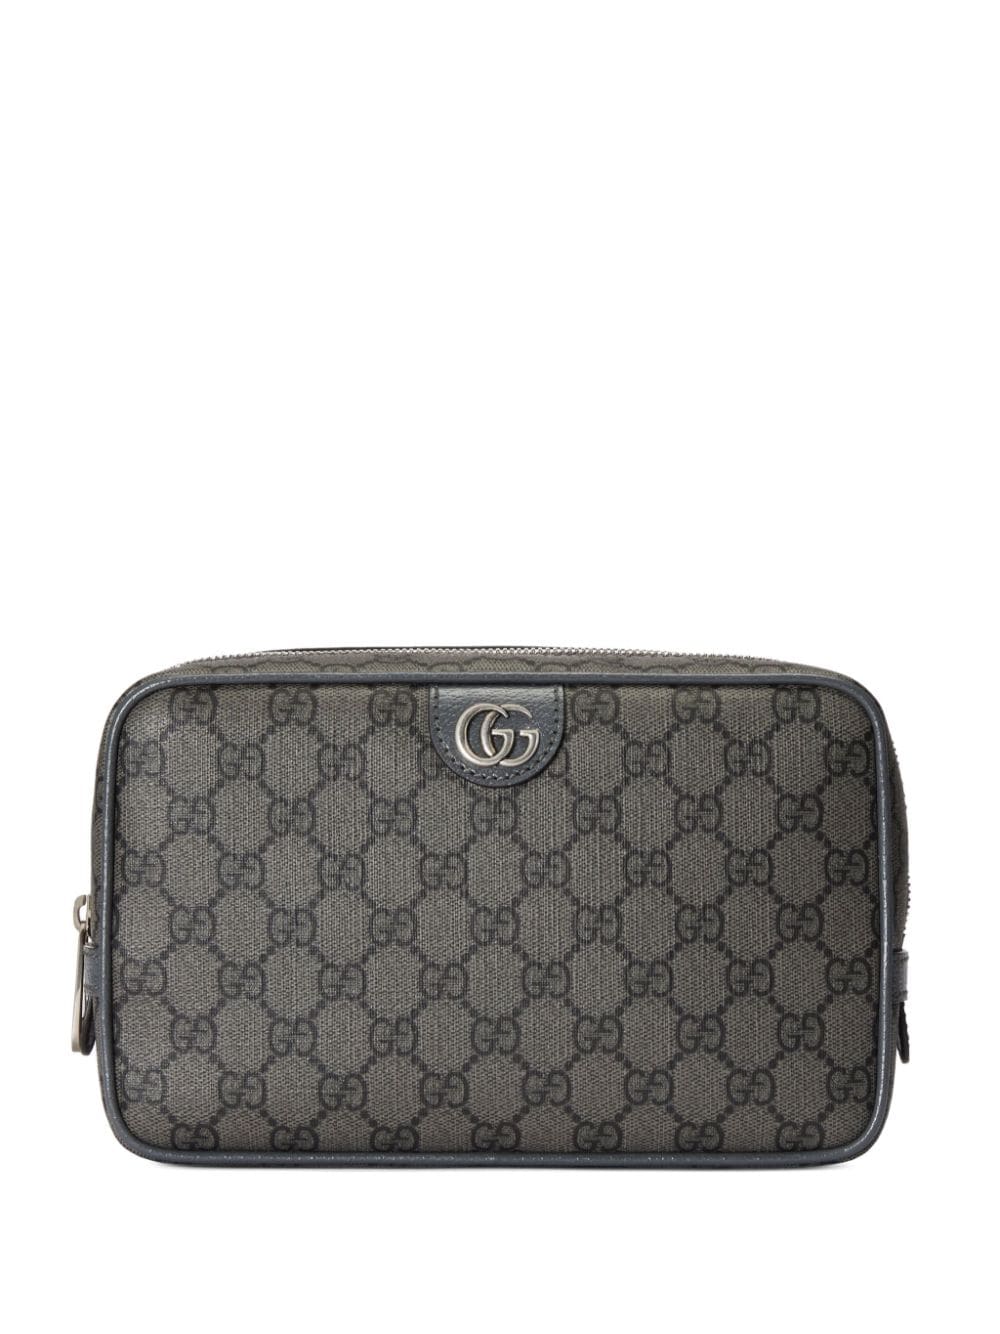 Gucci Ophidia Gg Wash Bag In Grey